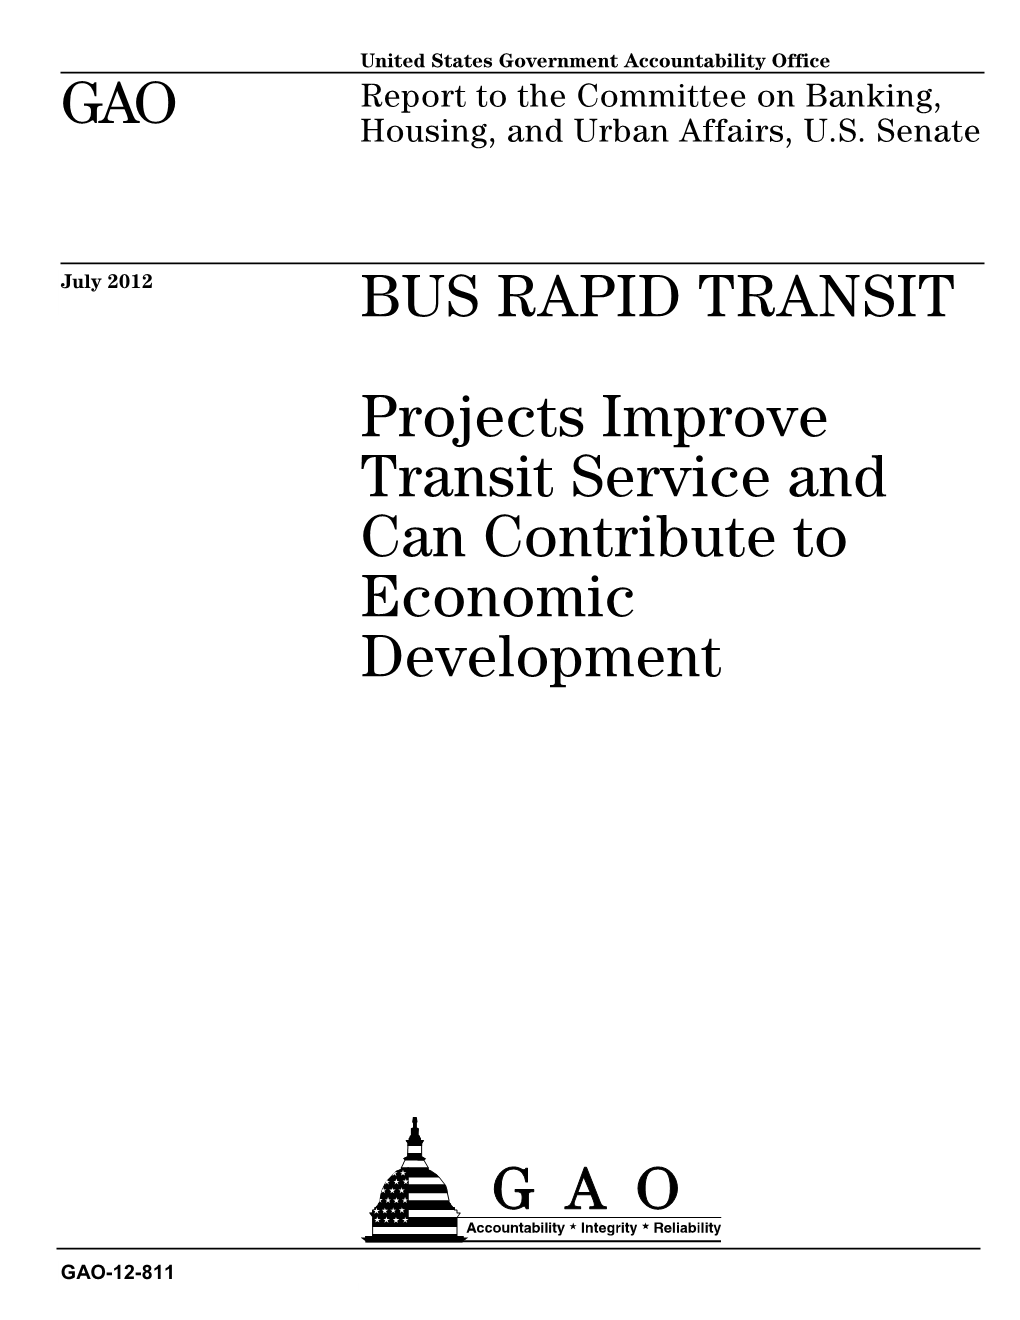 BUS RAPID TRANSIT Projects Improve Transit Service and Can Contribute to Economic Development